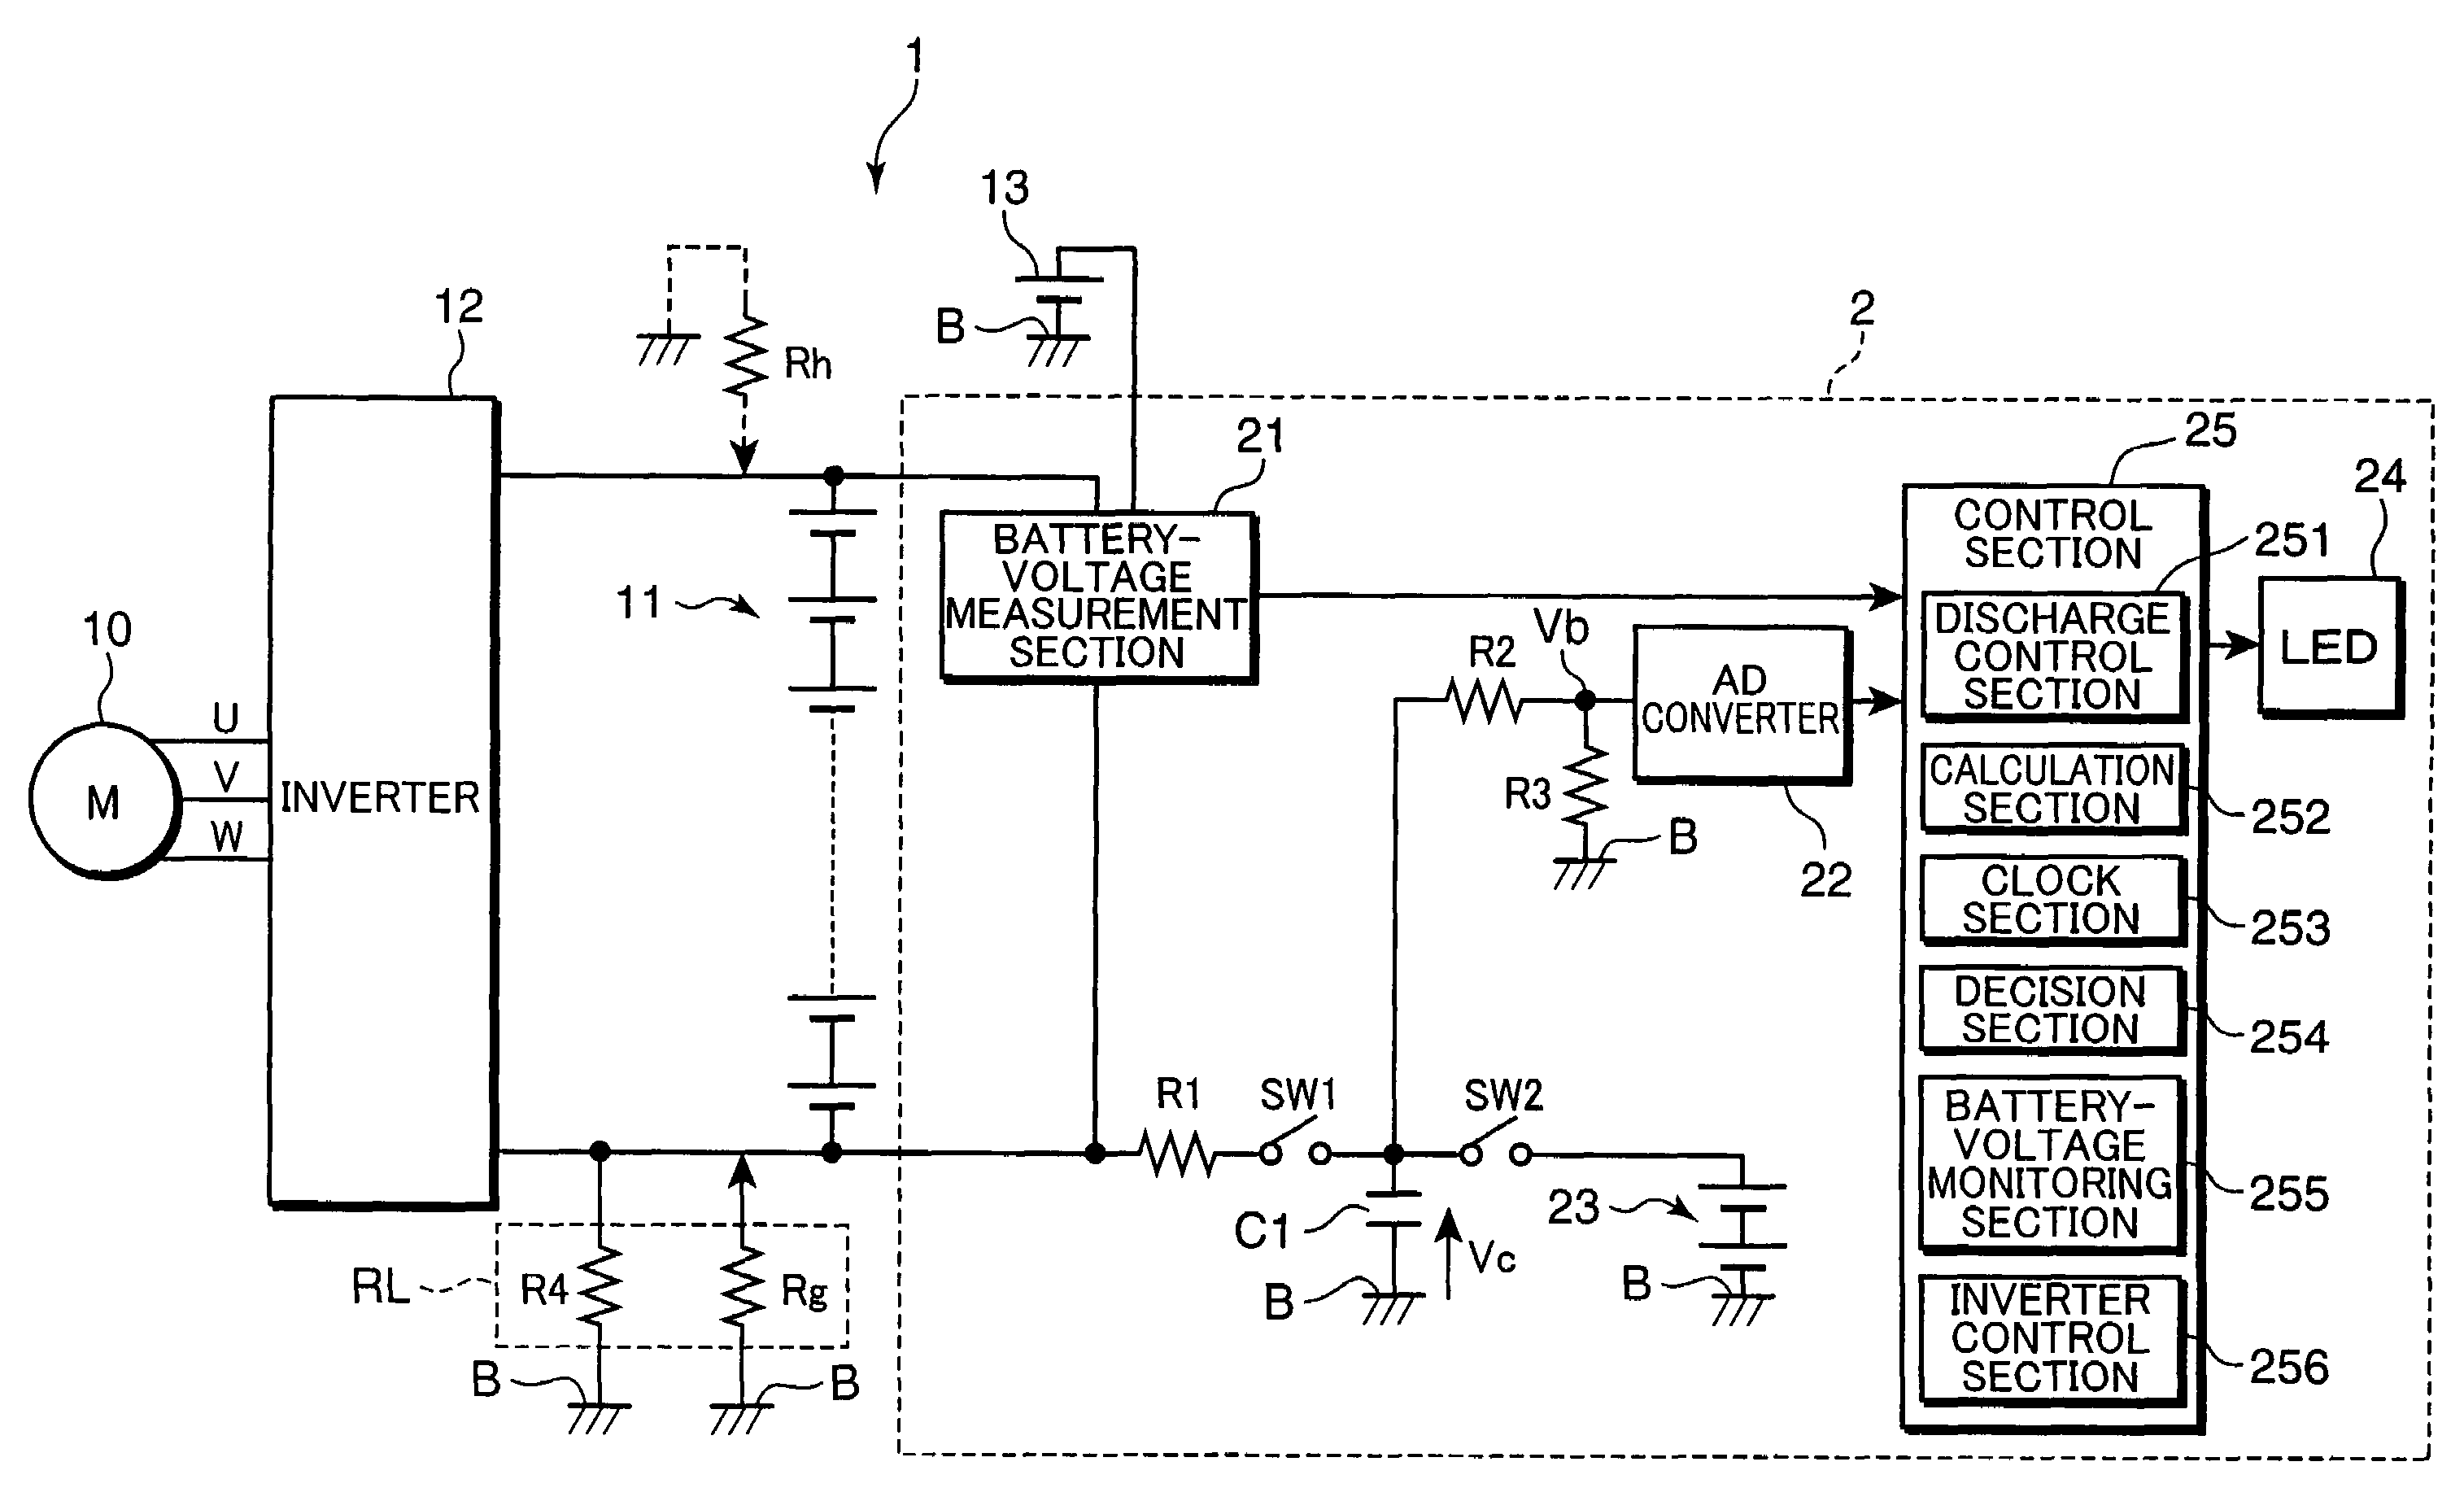 Ground-fault resistance measurement circuit and ground-fault detection circuit